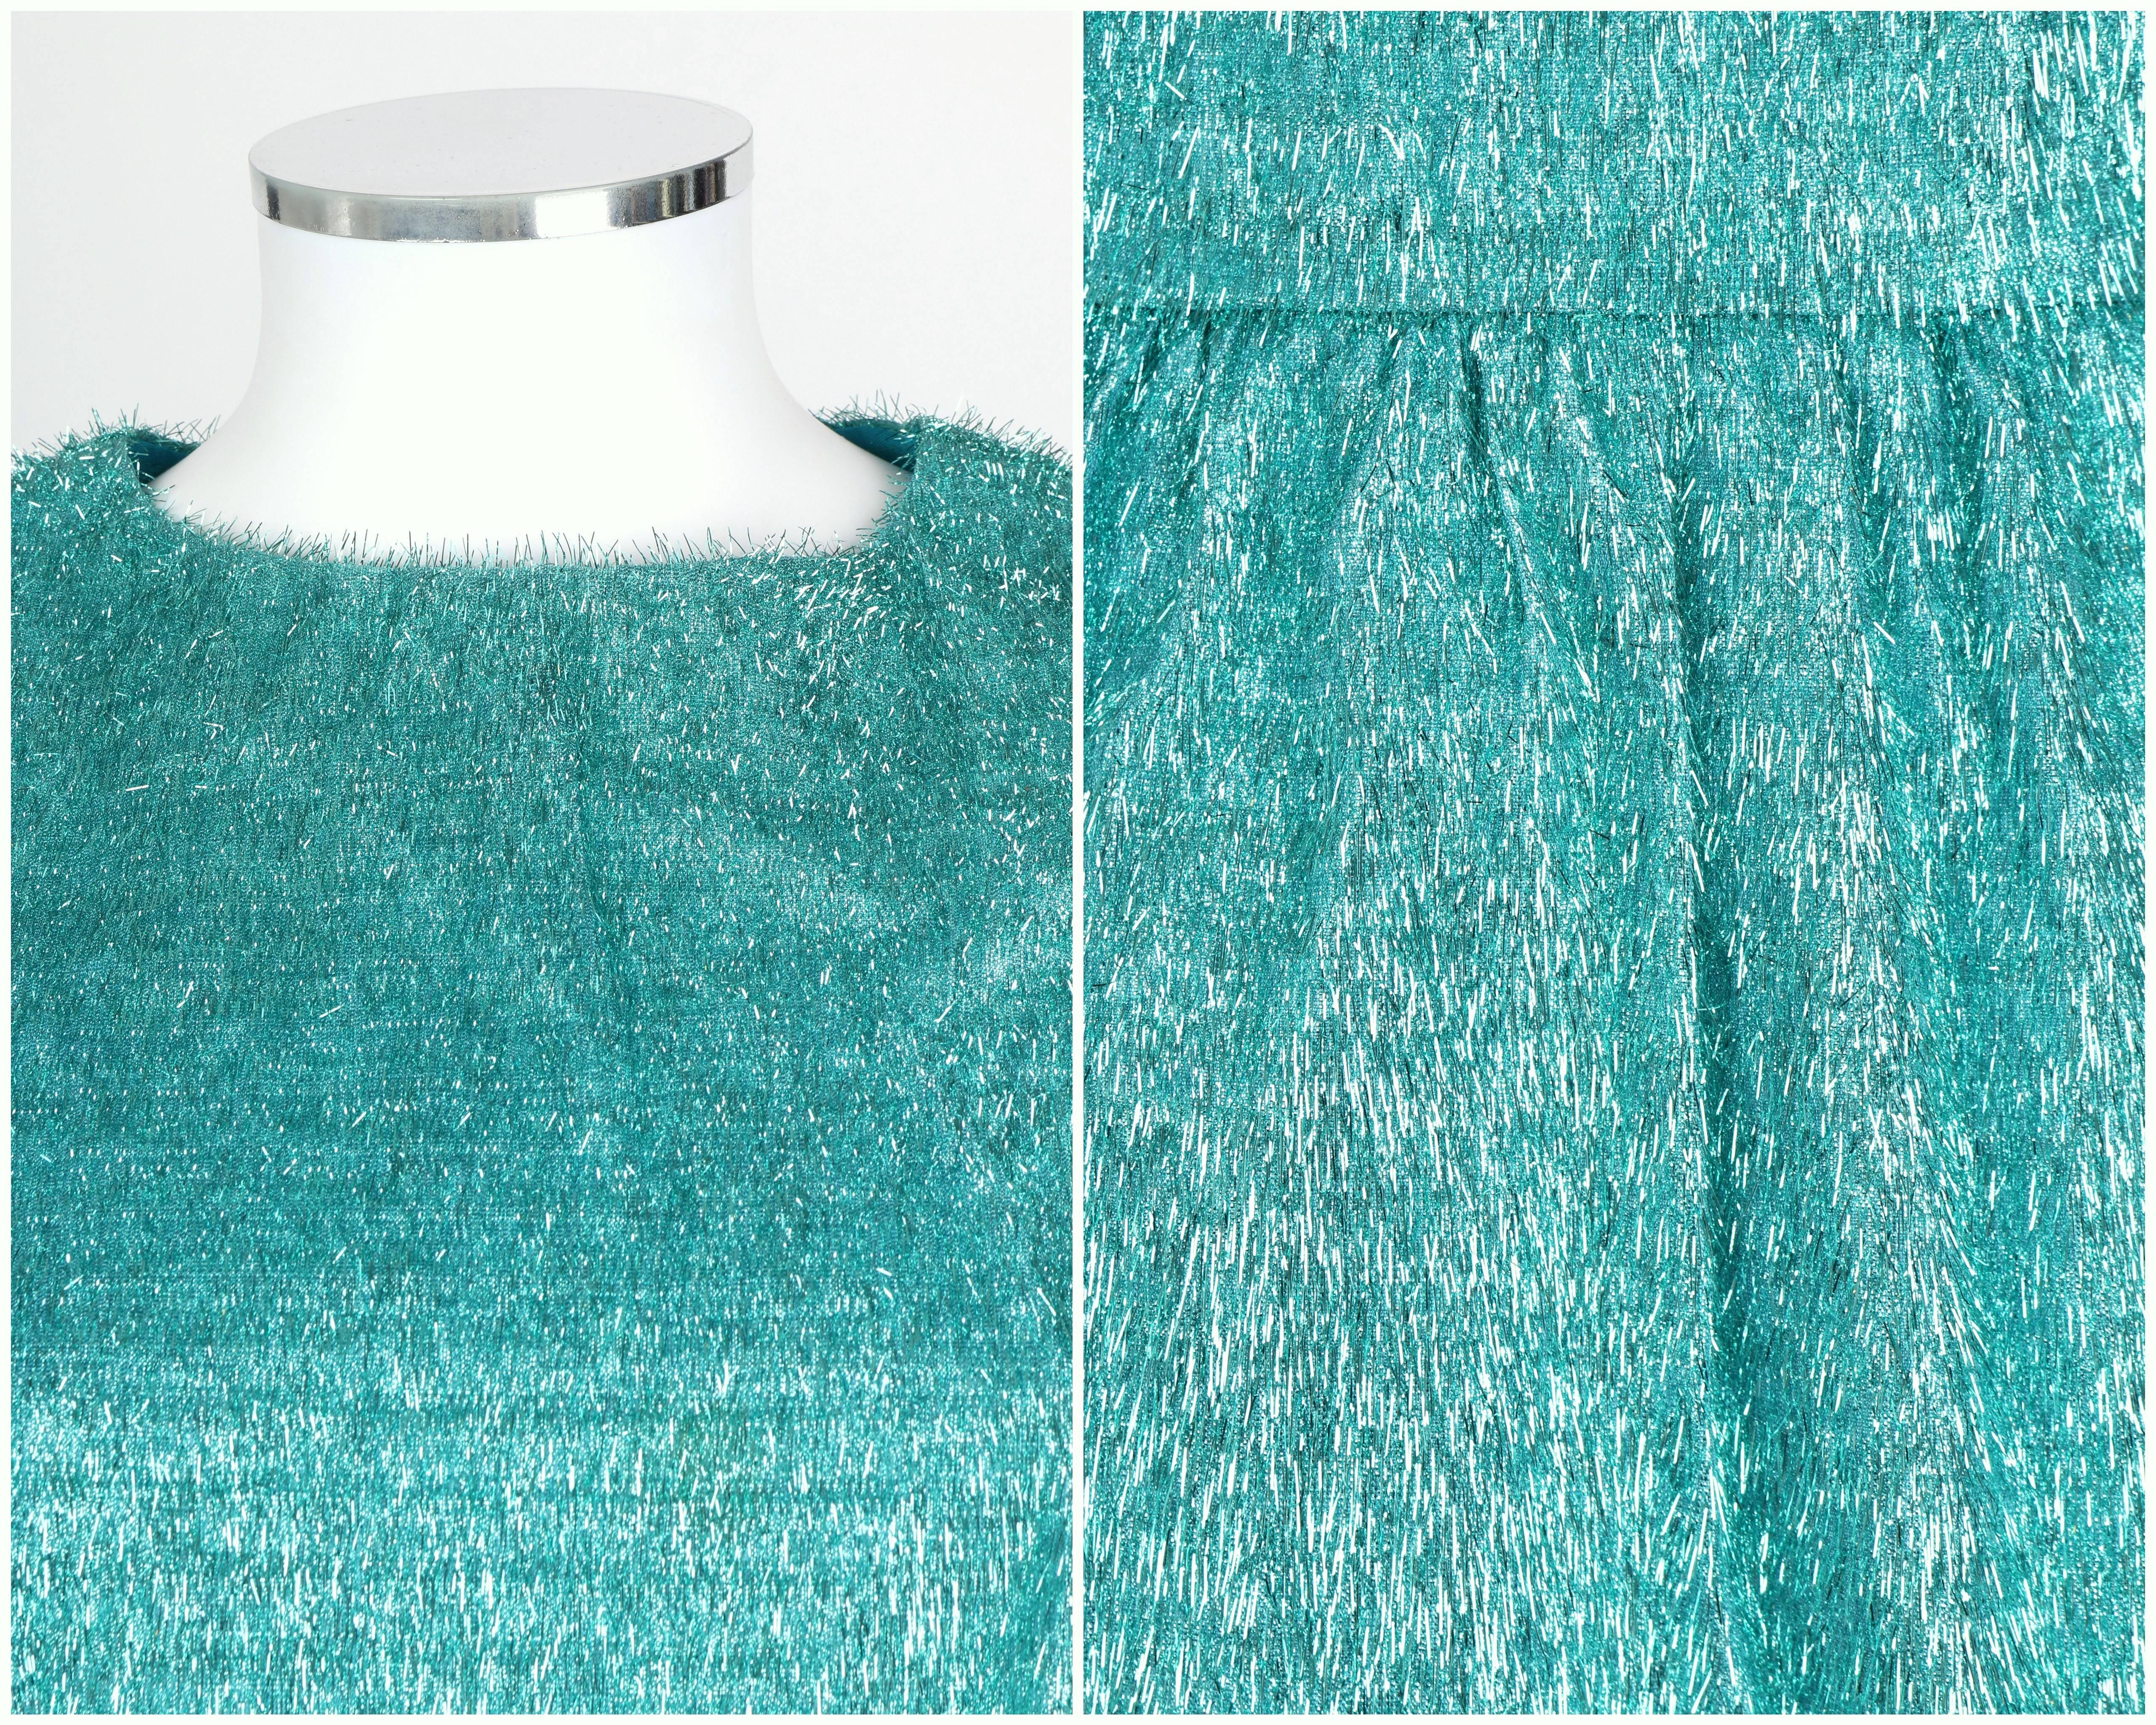 COUTURE c.1960's Turquoise Blue Metallic Tinsel Cocktail Party Shift Dress In Good Condition For Sale In Thiensville, WI